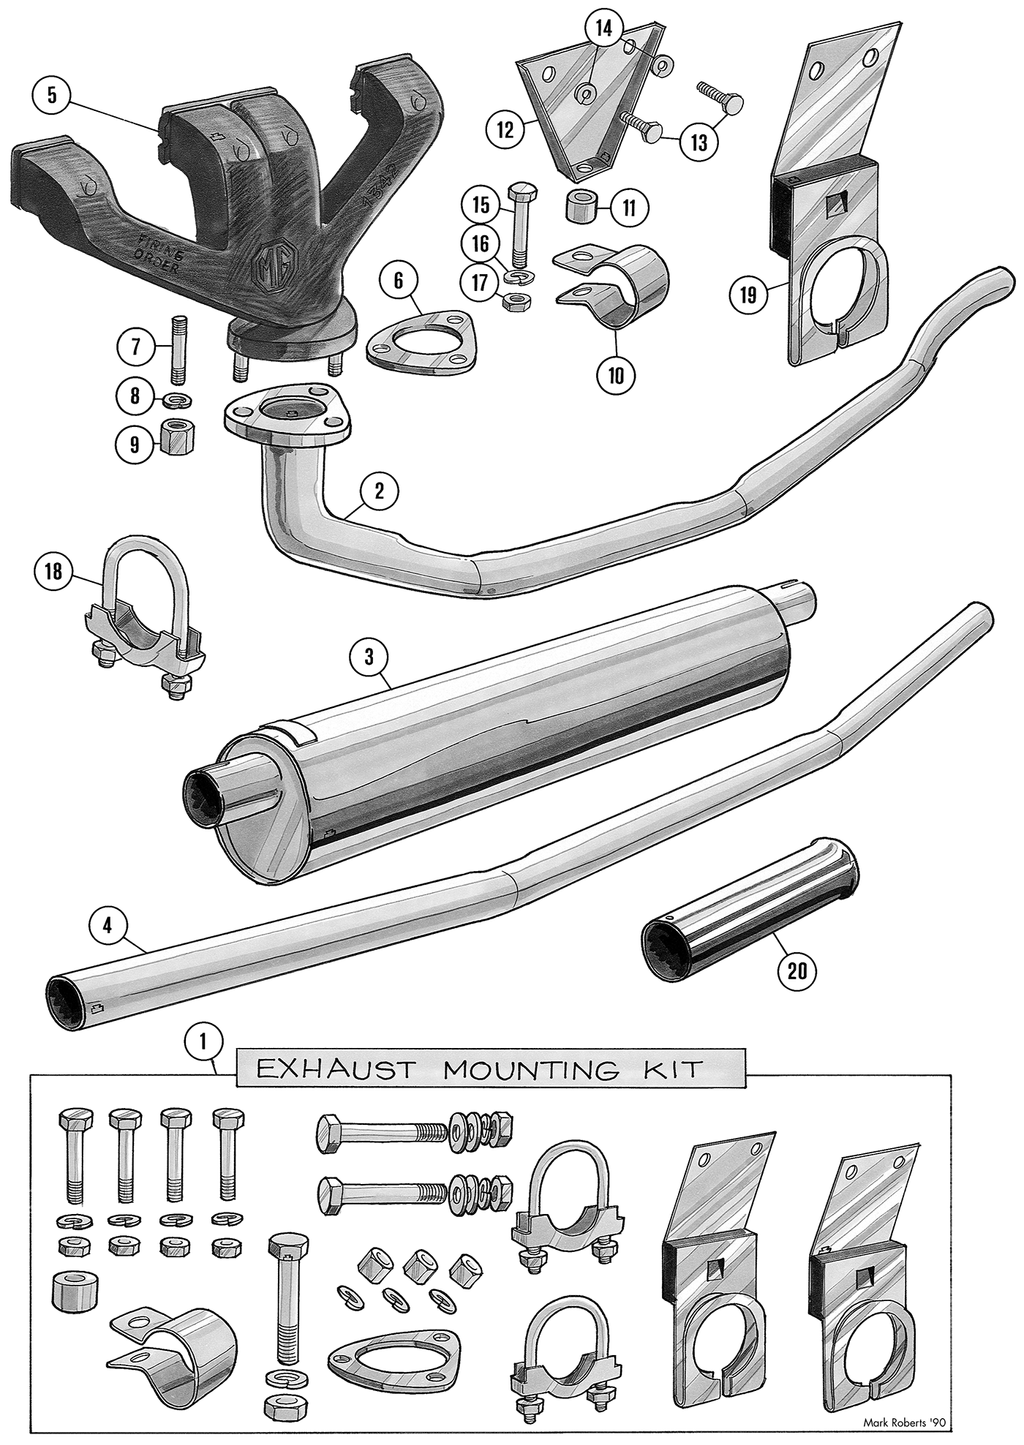 MGTD-TF 1949-1955 - Tailpipes & tips | Webshop Anglo Parts - Exhaust system - 1